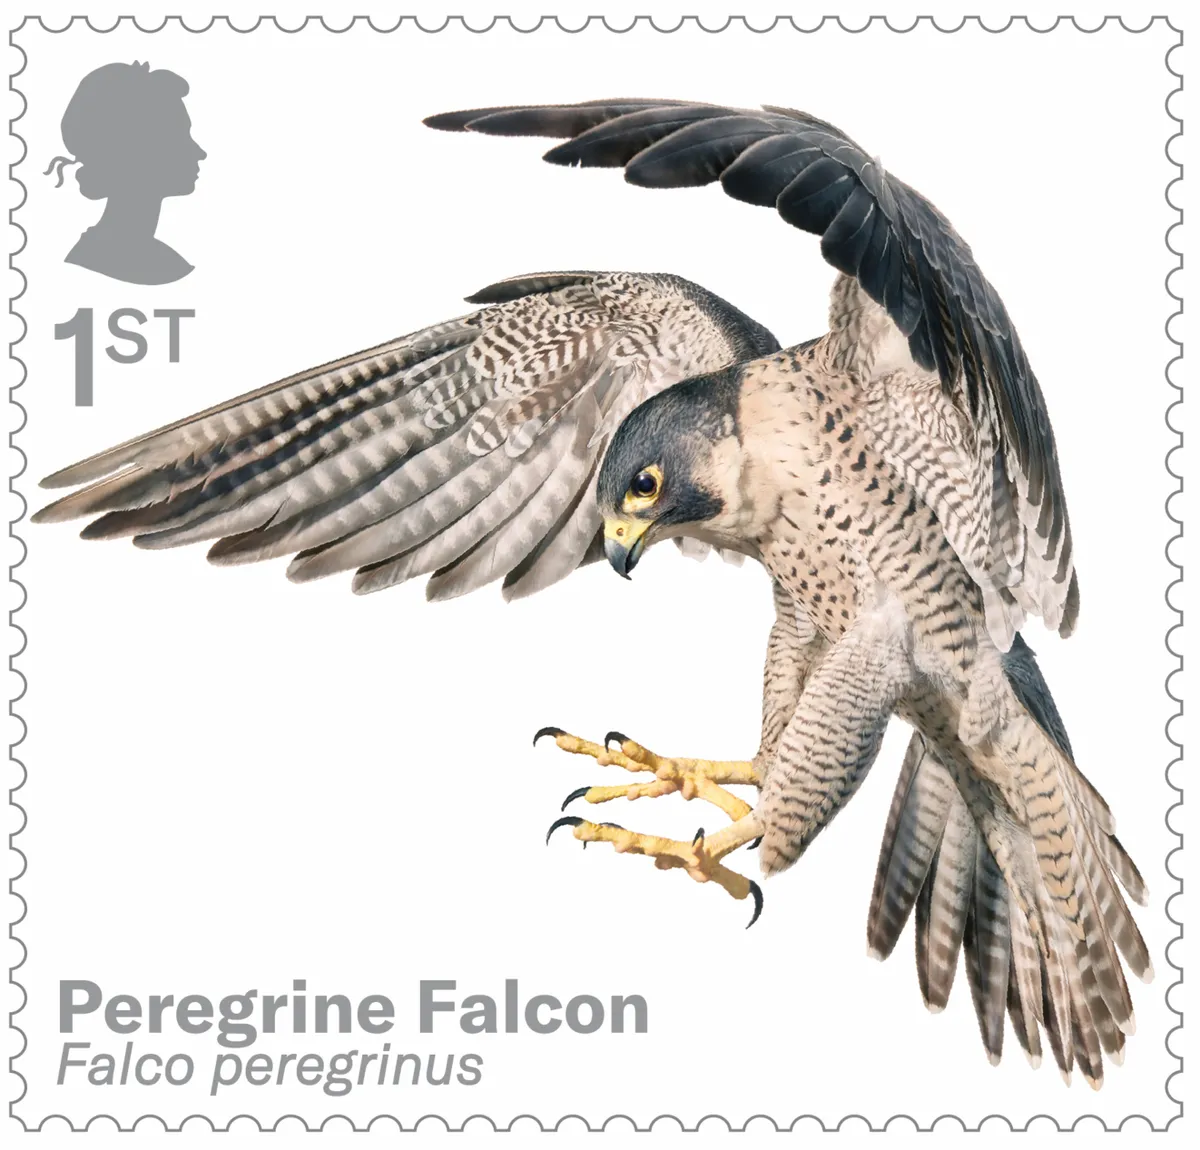 Bird of prey stamp collection - peregrine falcon. © Tim Flach/Royal Mail.